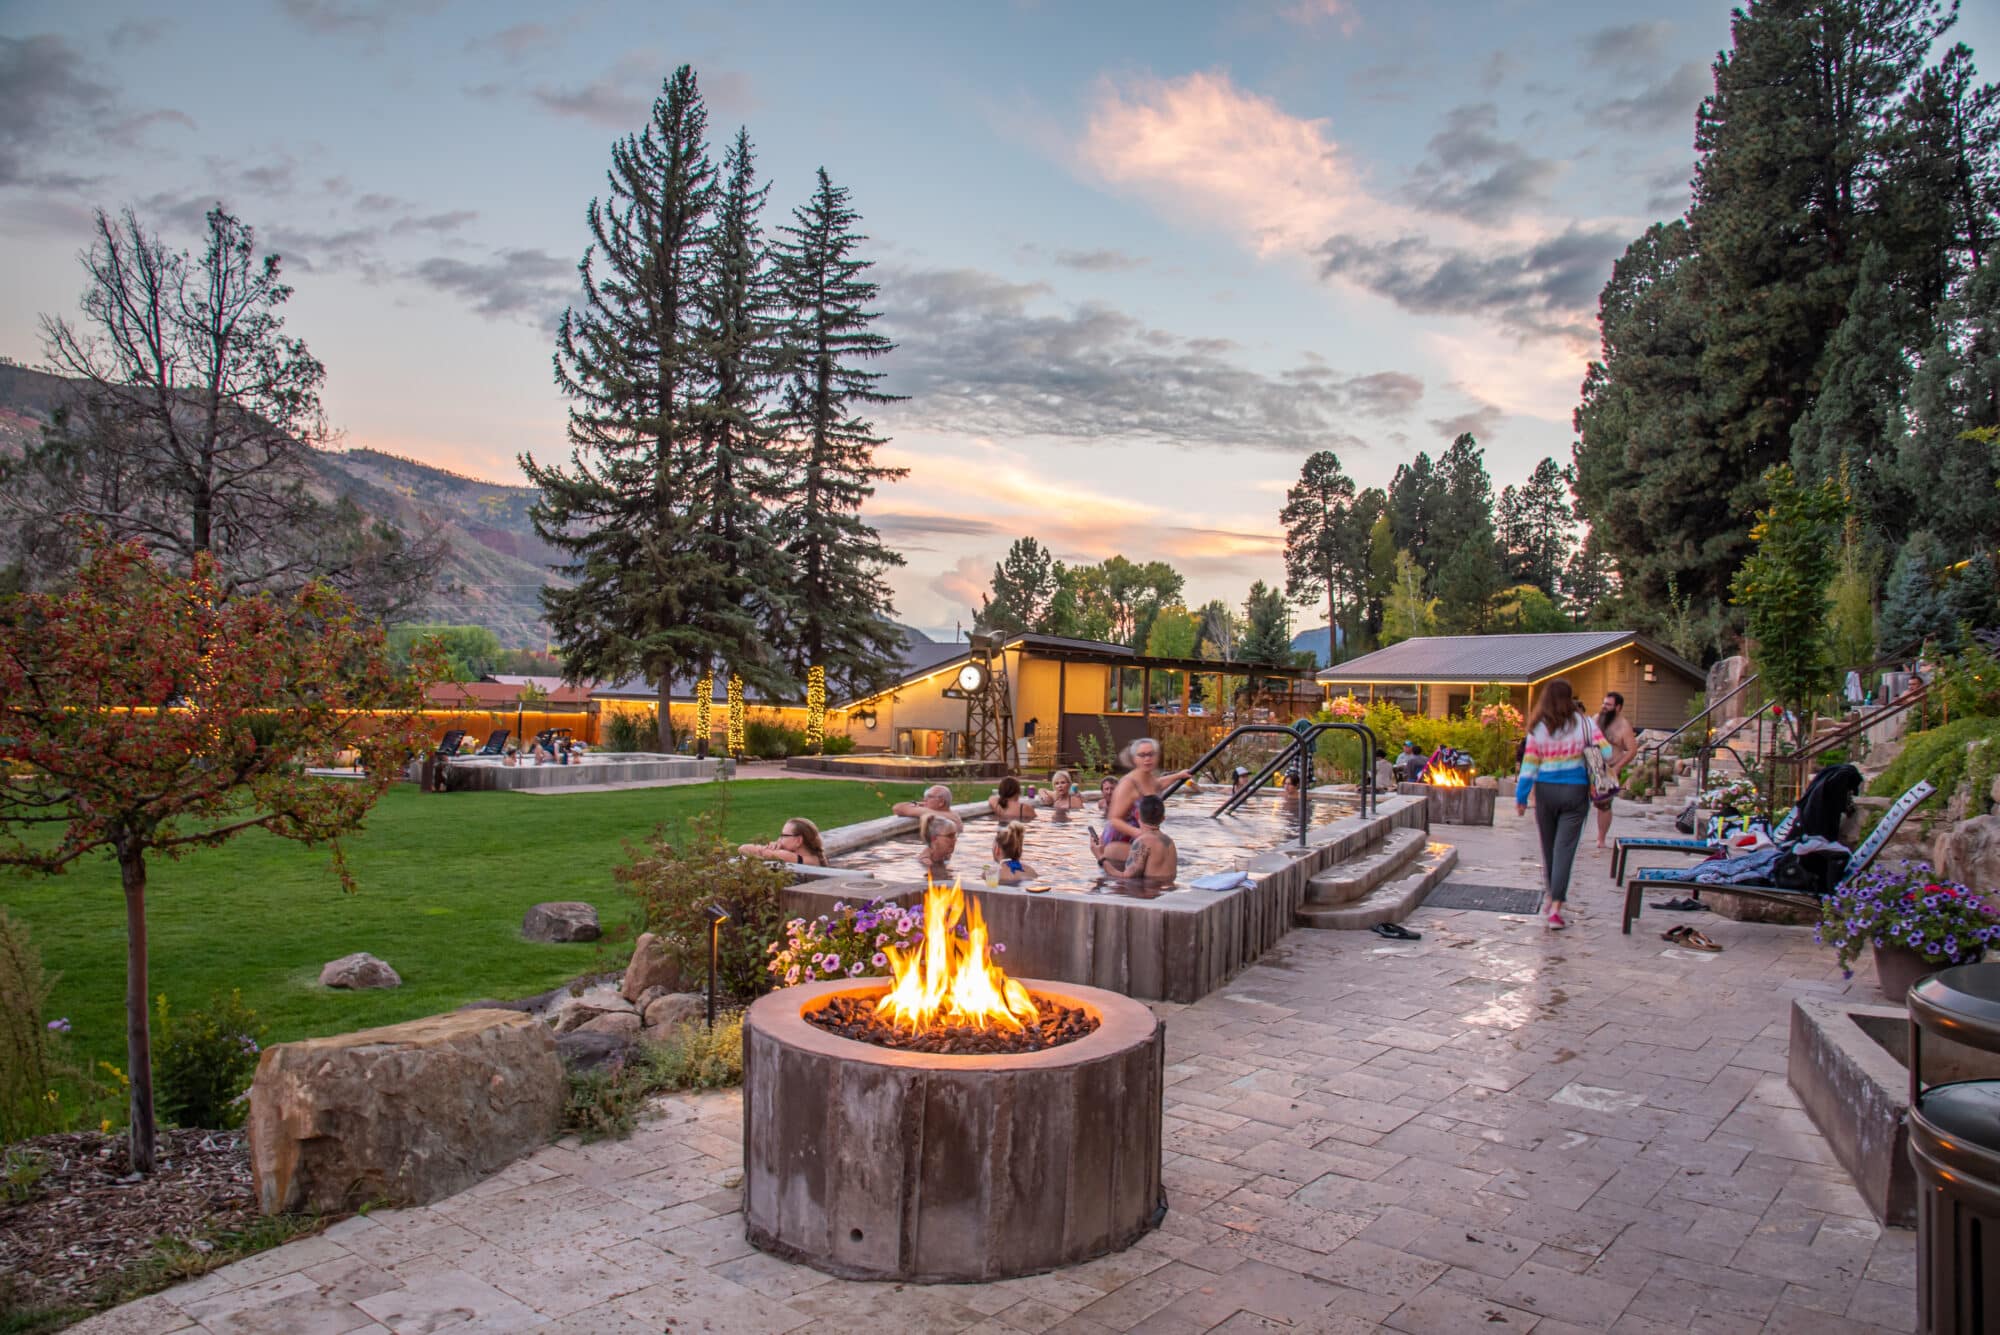 A fire place and hot springs pool at sun set at Durango Hot Springs